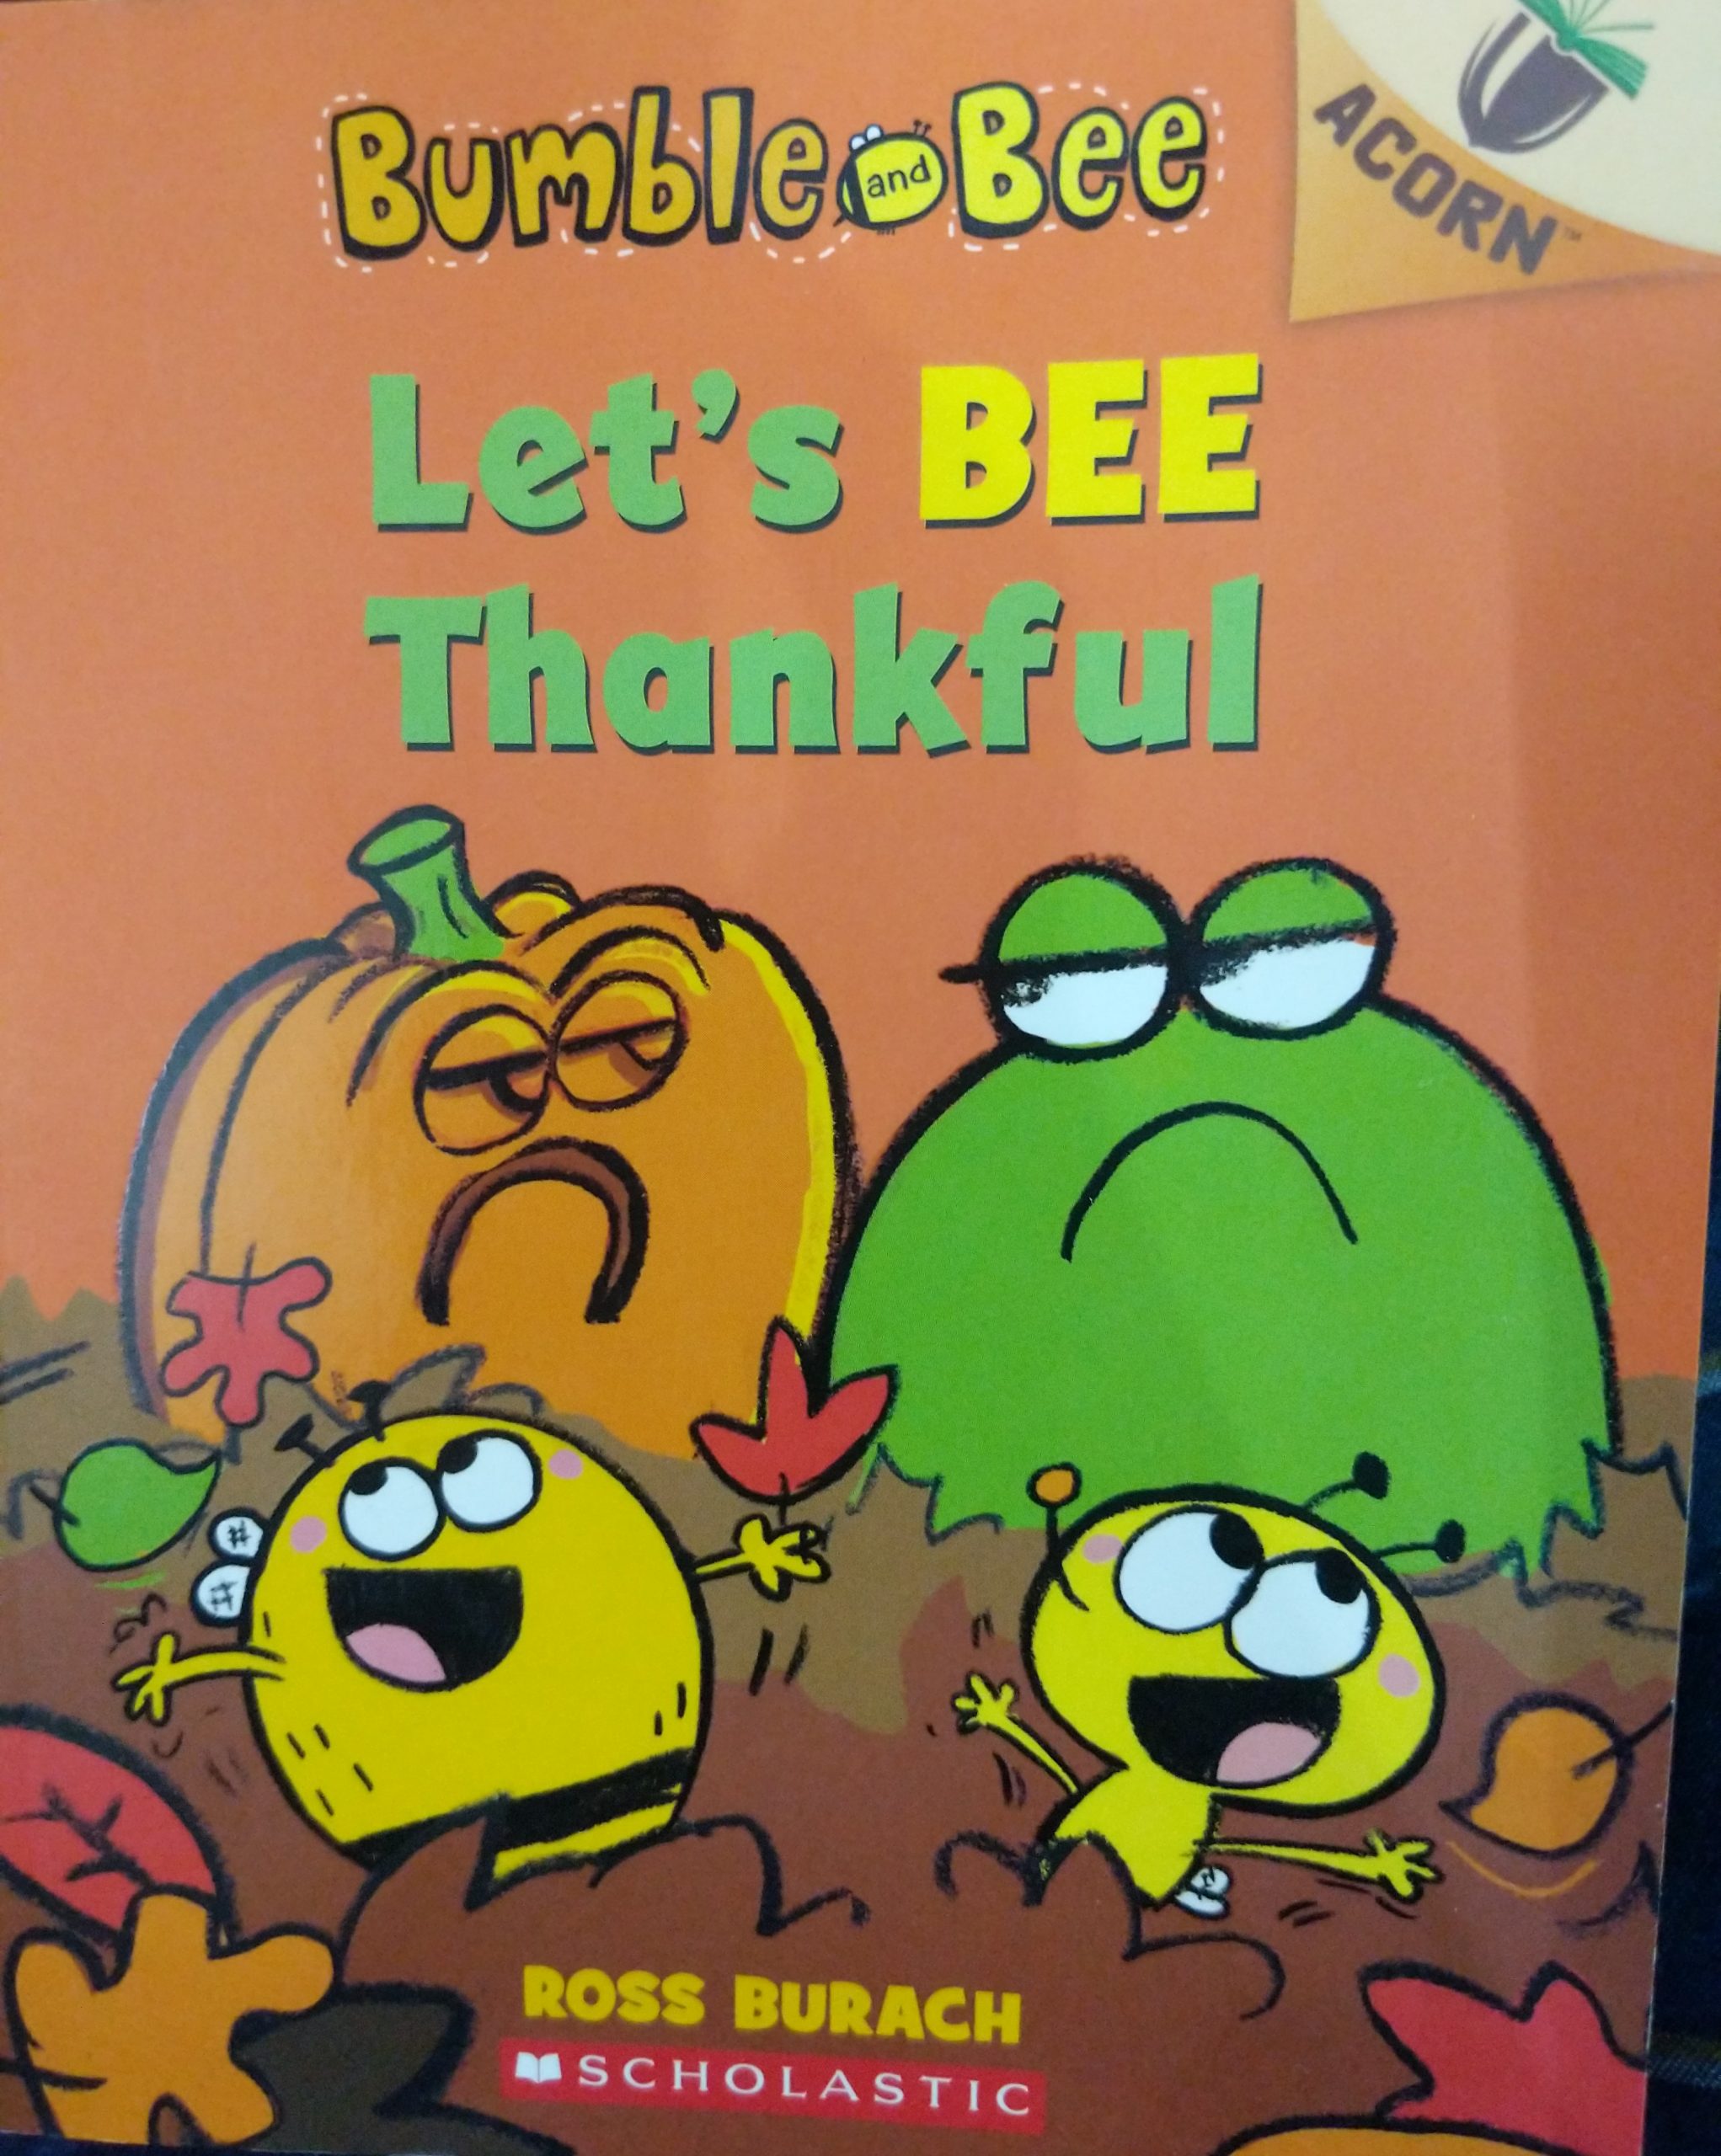 Review: Let’s BEE Thankful (Bumble and Bee)